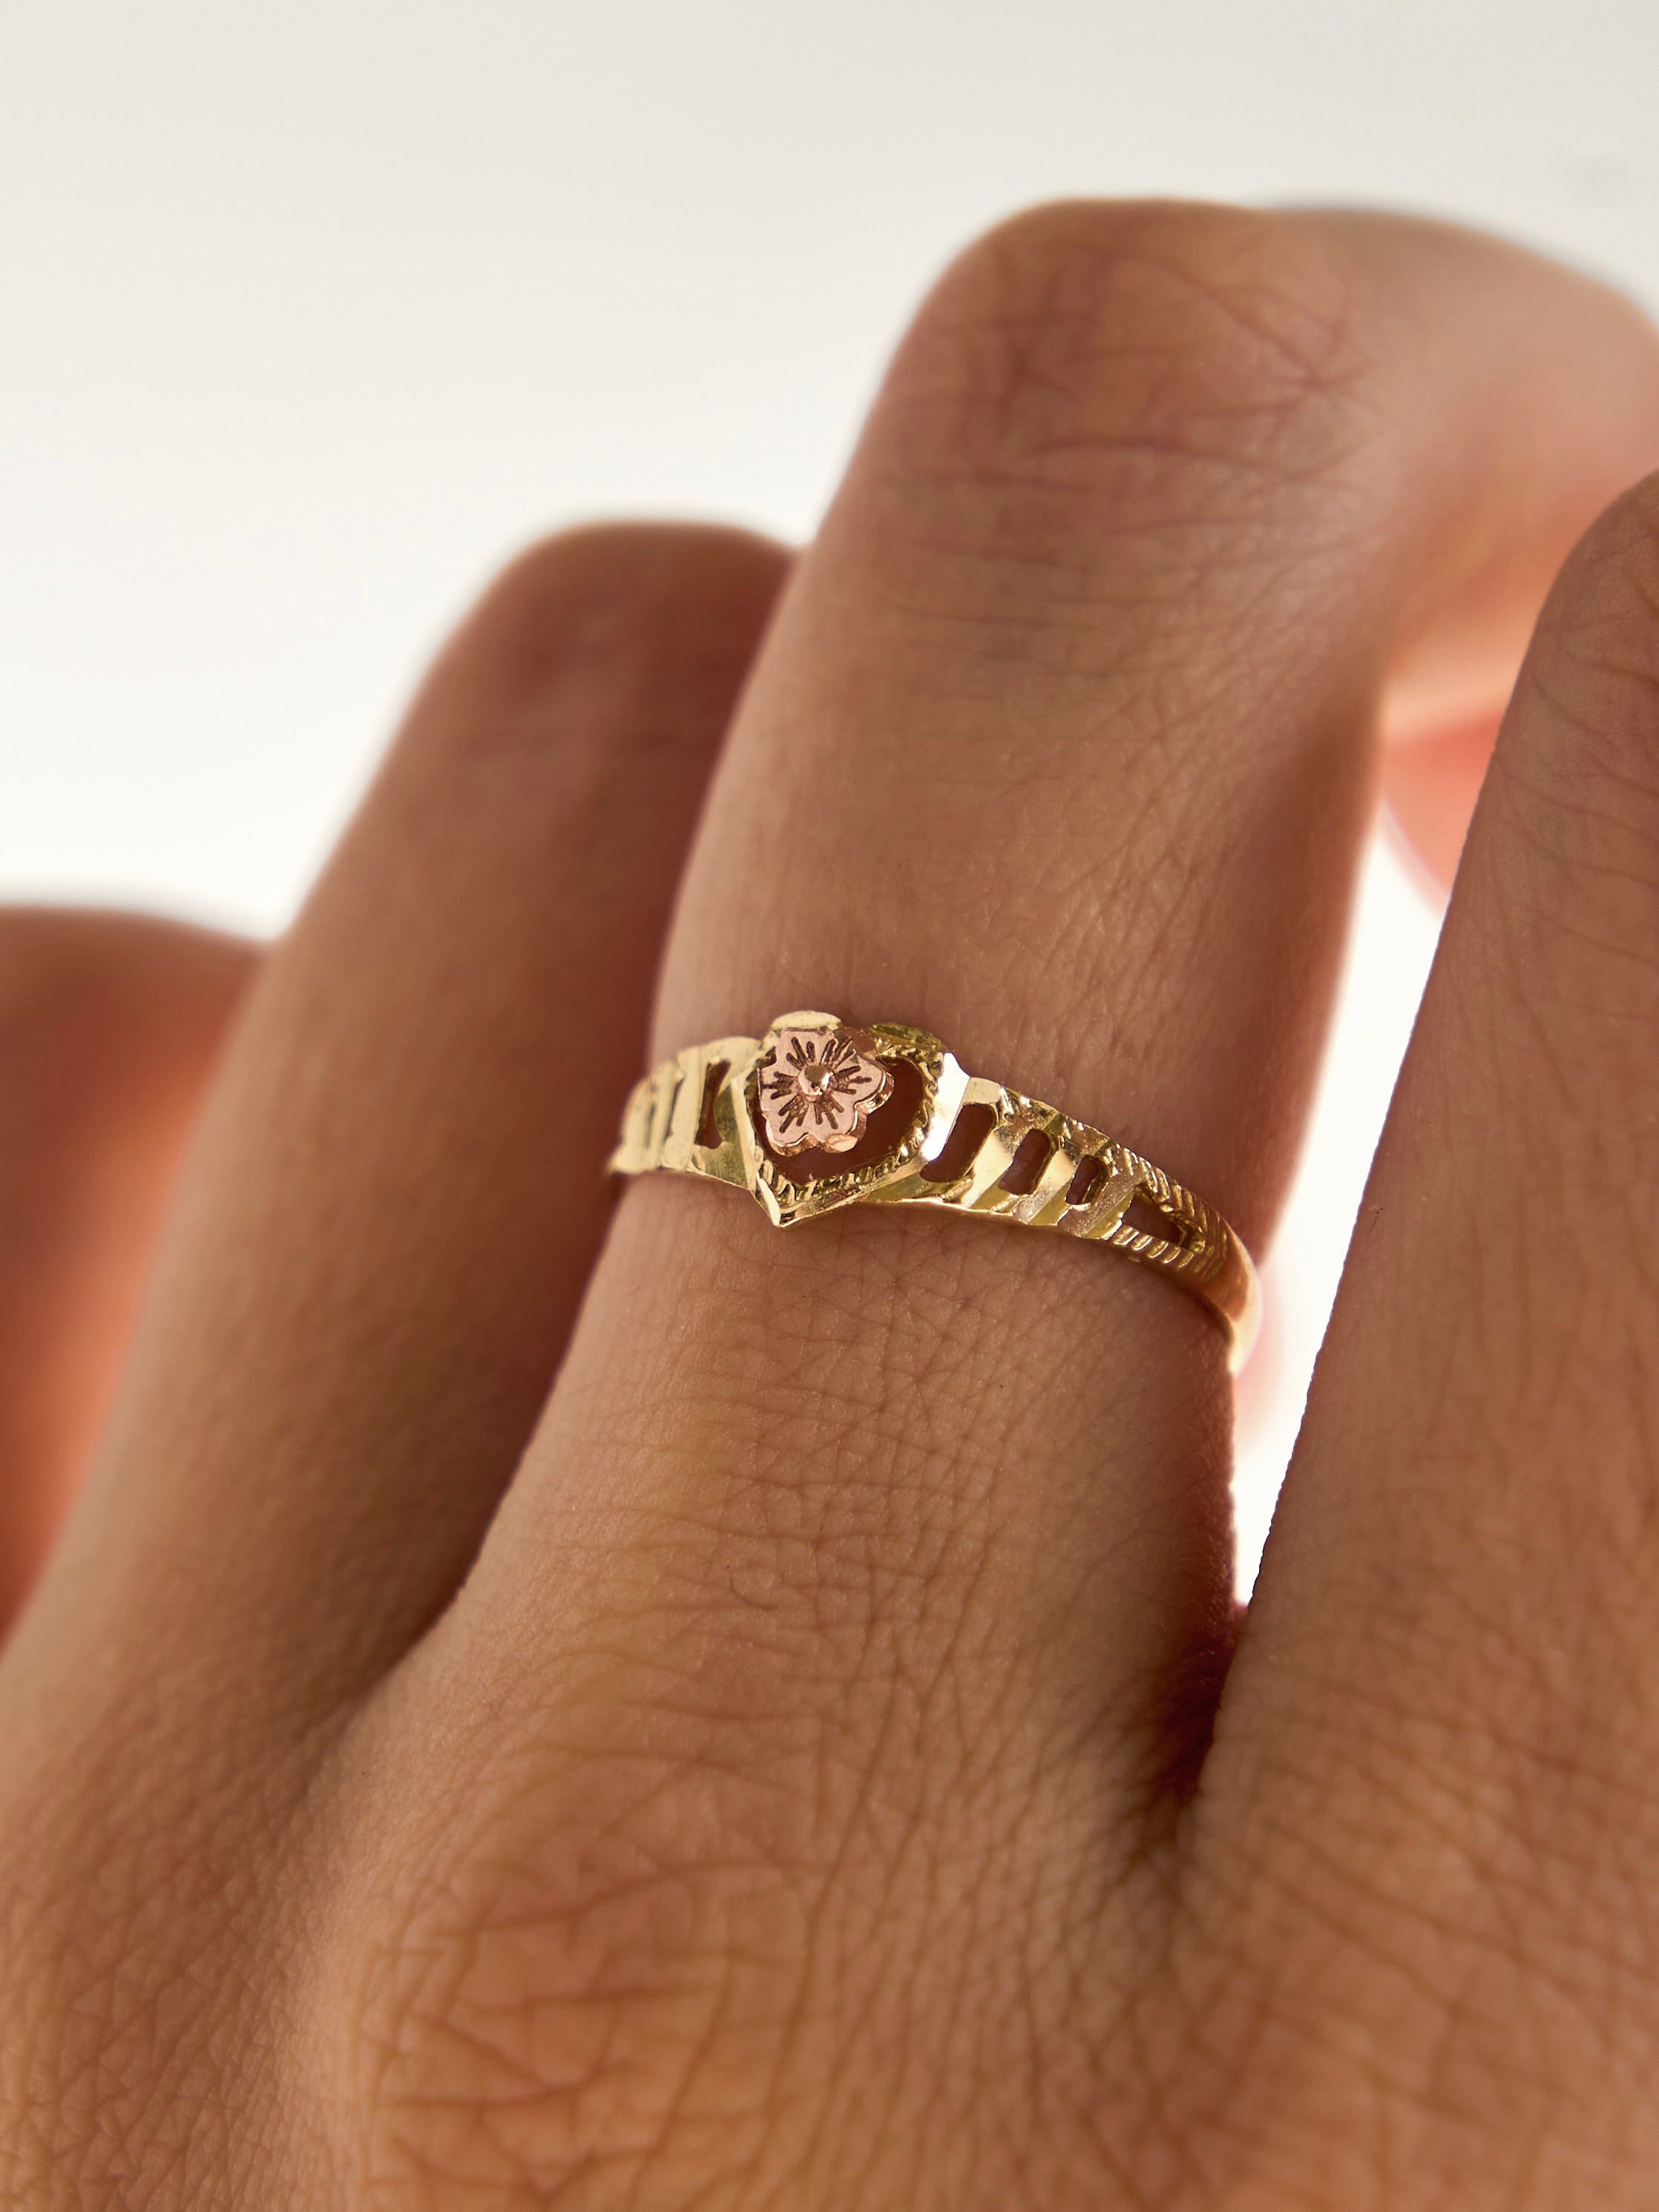 THE BLOOMING HEART RING